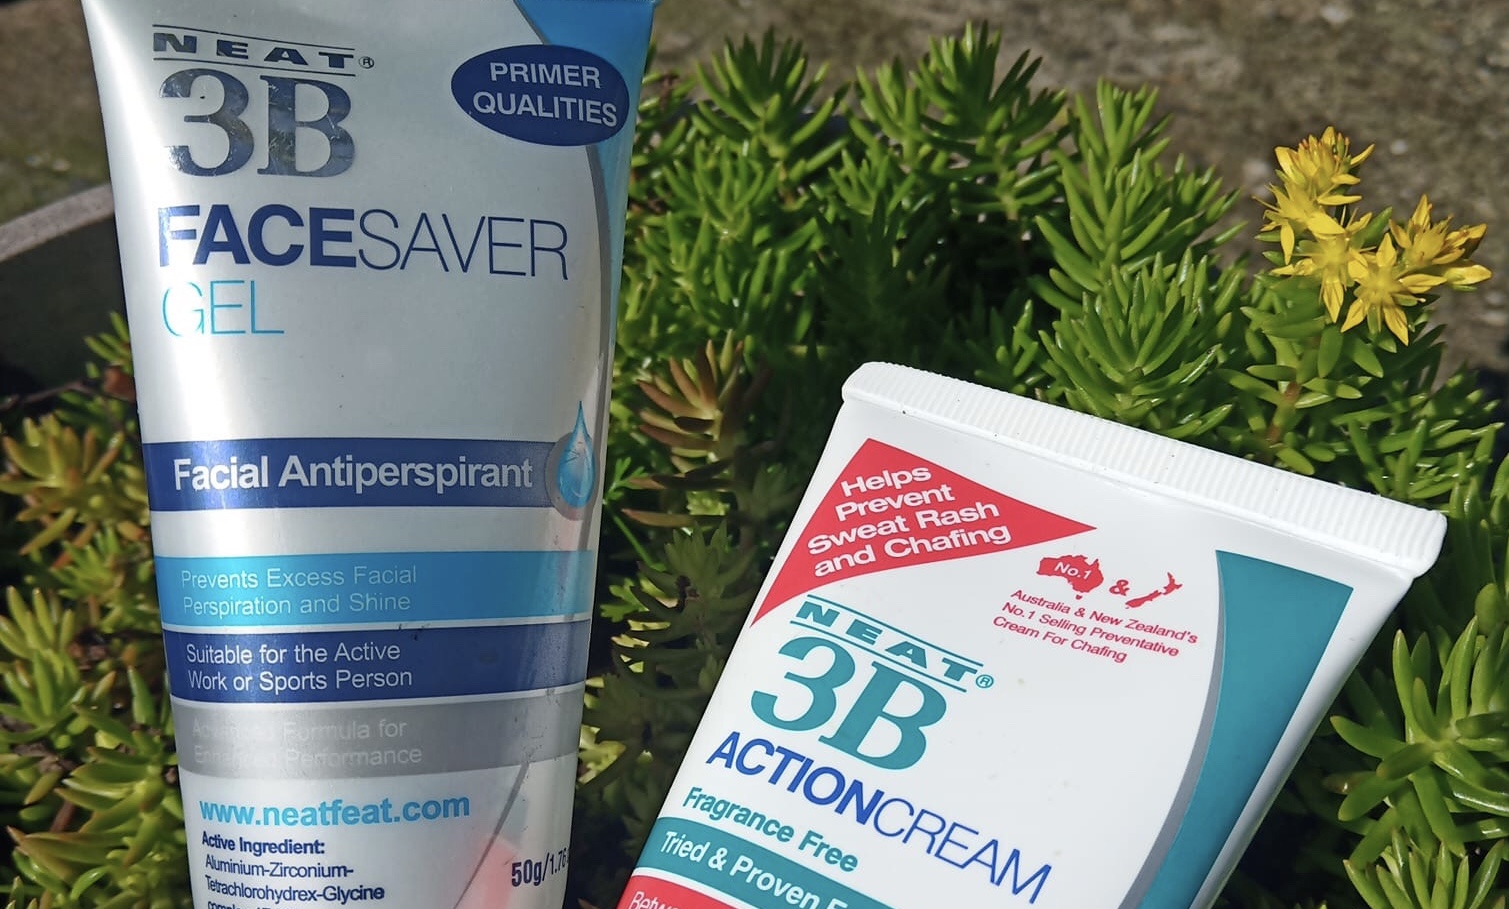 Neat Face Saver: An antiperspirant for the face? Why not?